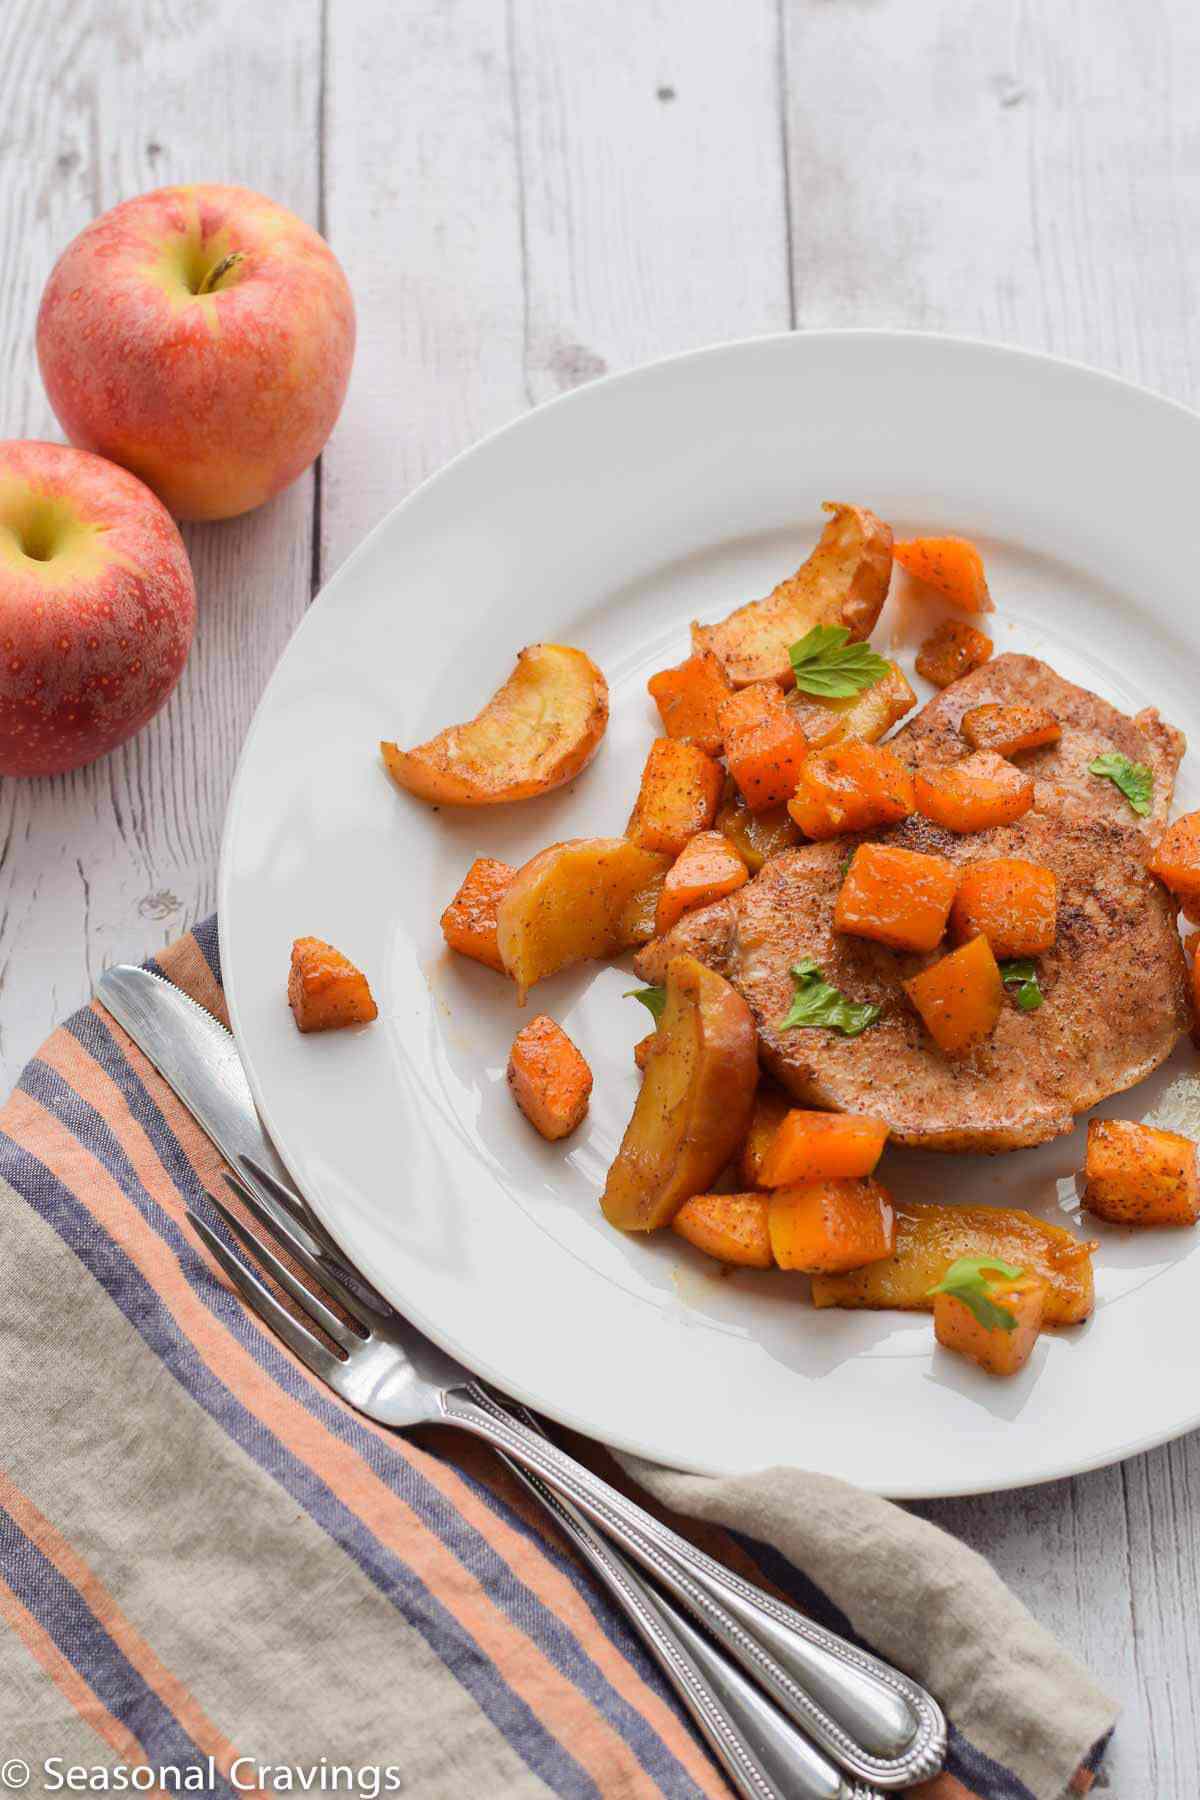 Brown Sugar Pork Chops with Butternut Squash and Apples